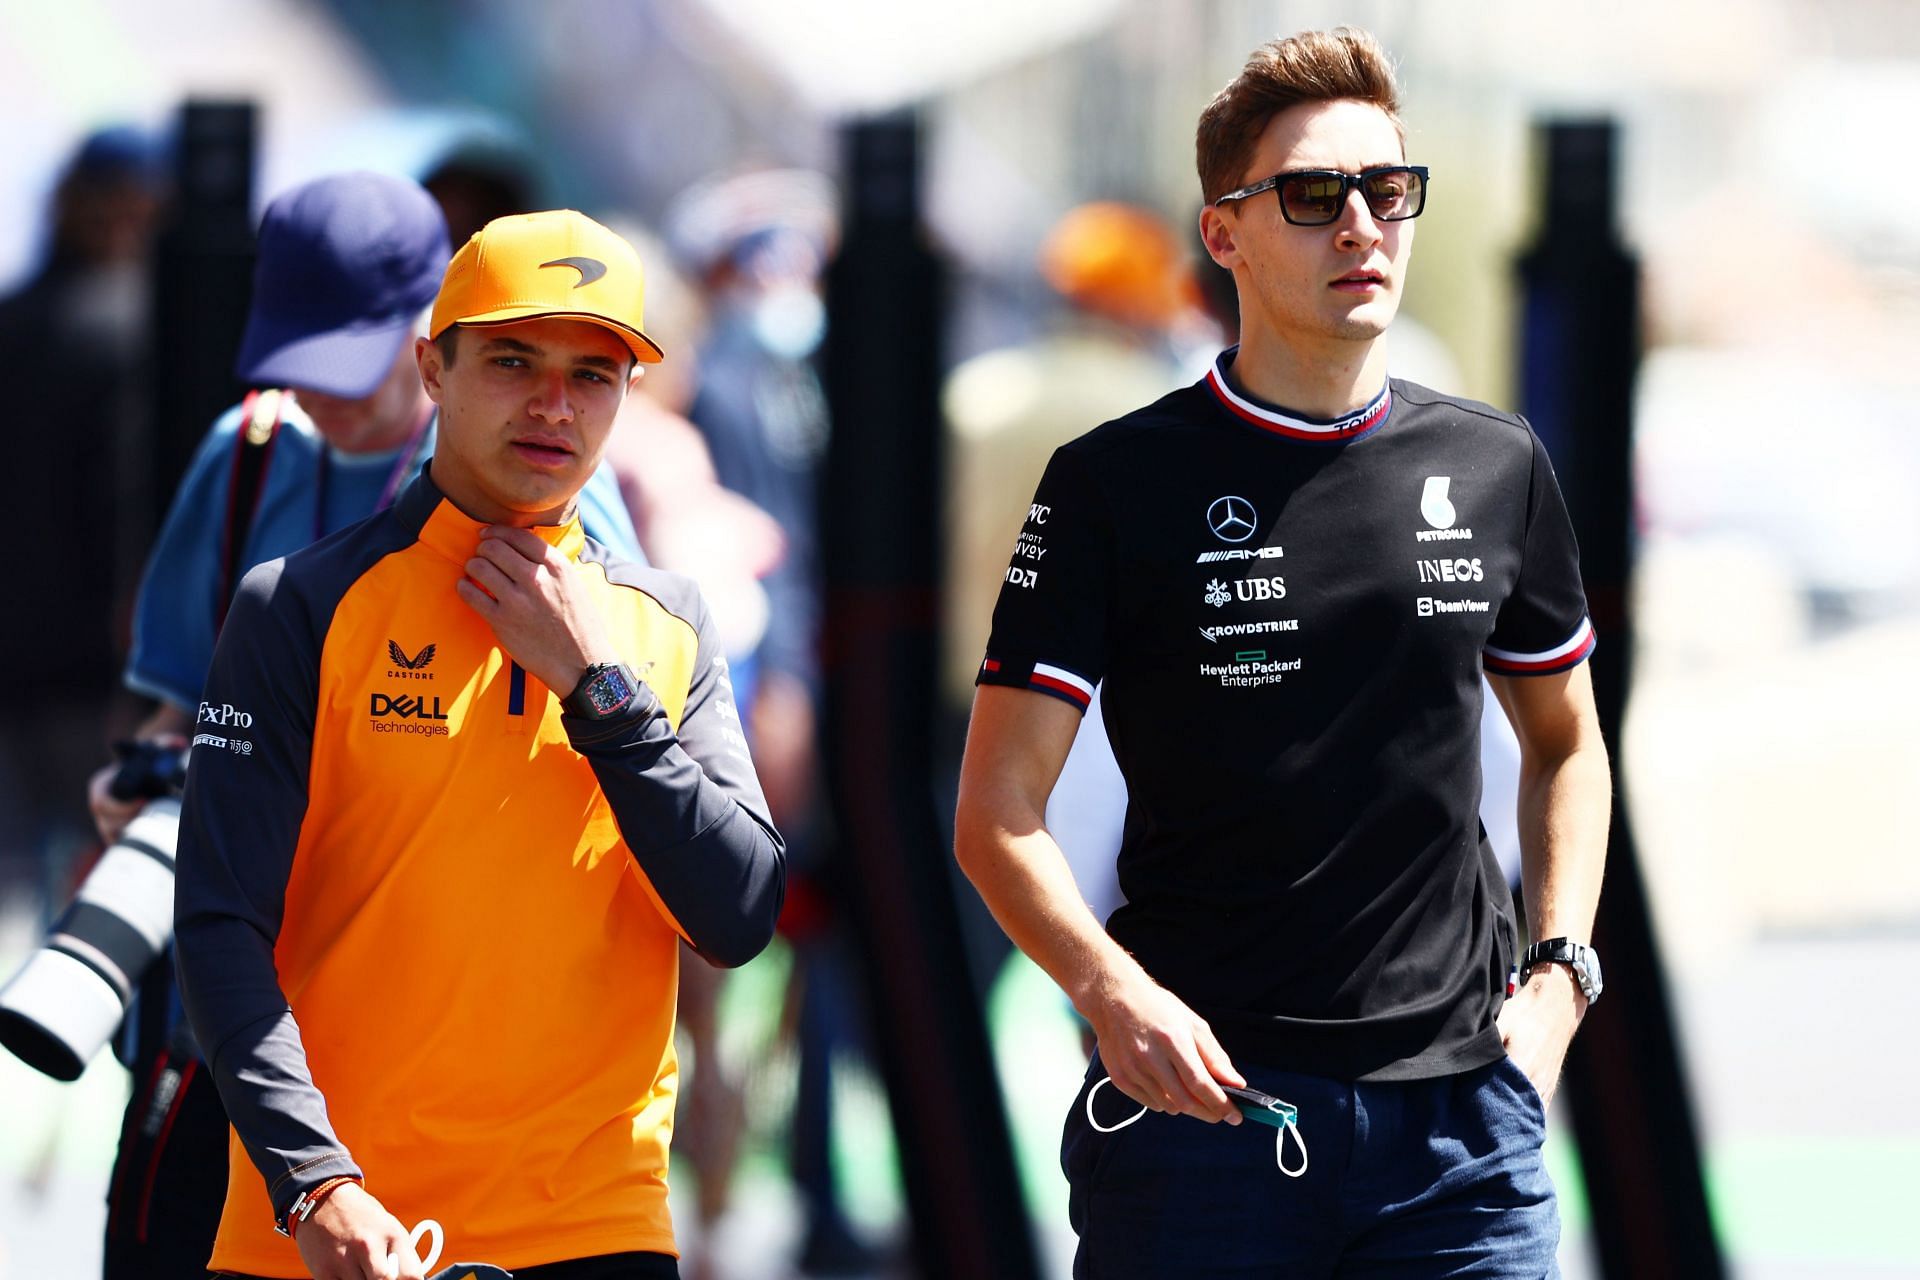 Who will win the next F1 championship for Britain? The young guns or the veteran?